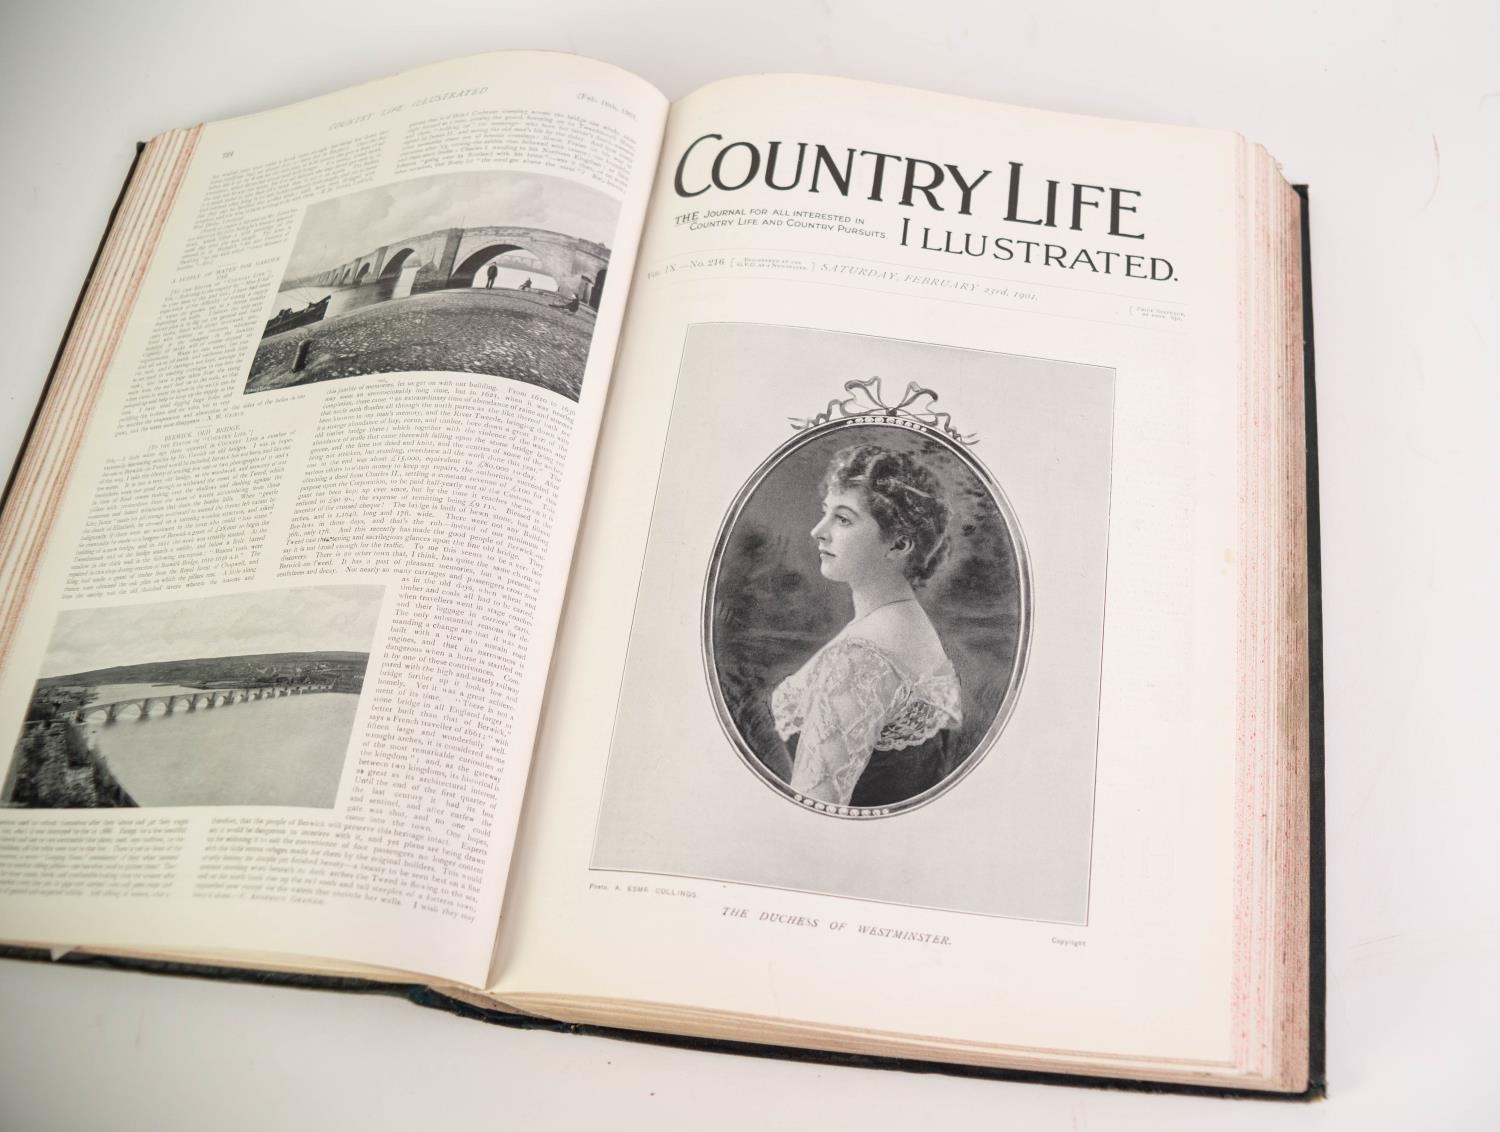 COUNTRY LIFE ILLUSTRATED magazine, The Journal for all interested in Country Life and Country - Image 6 of 6